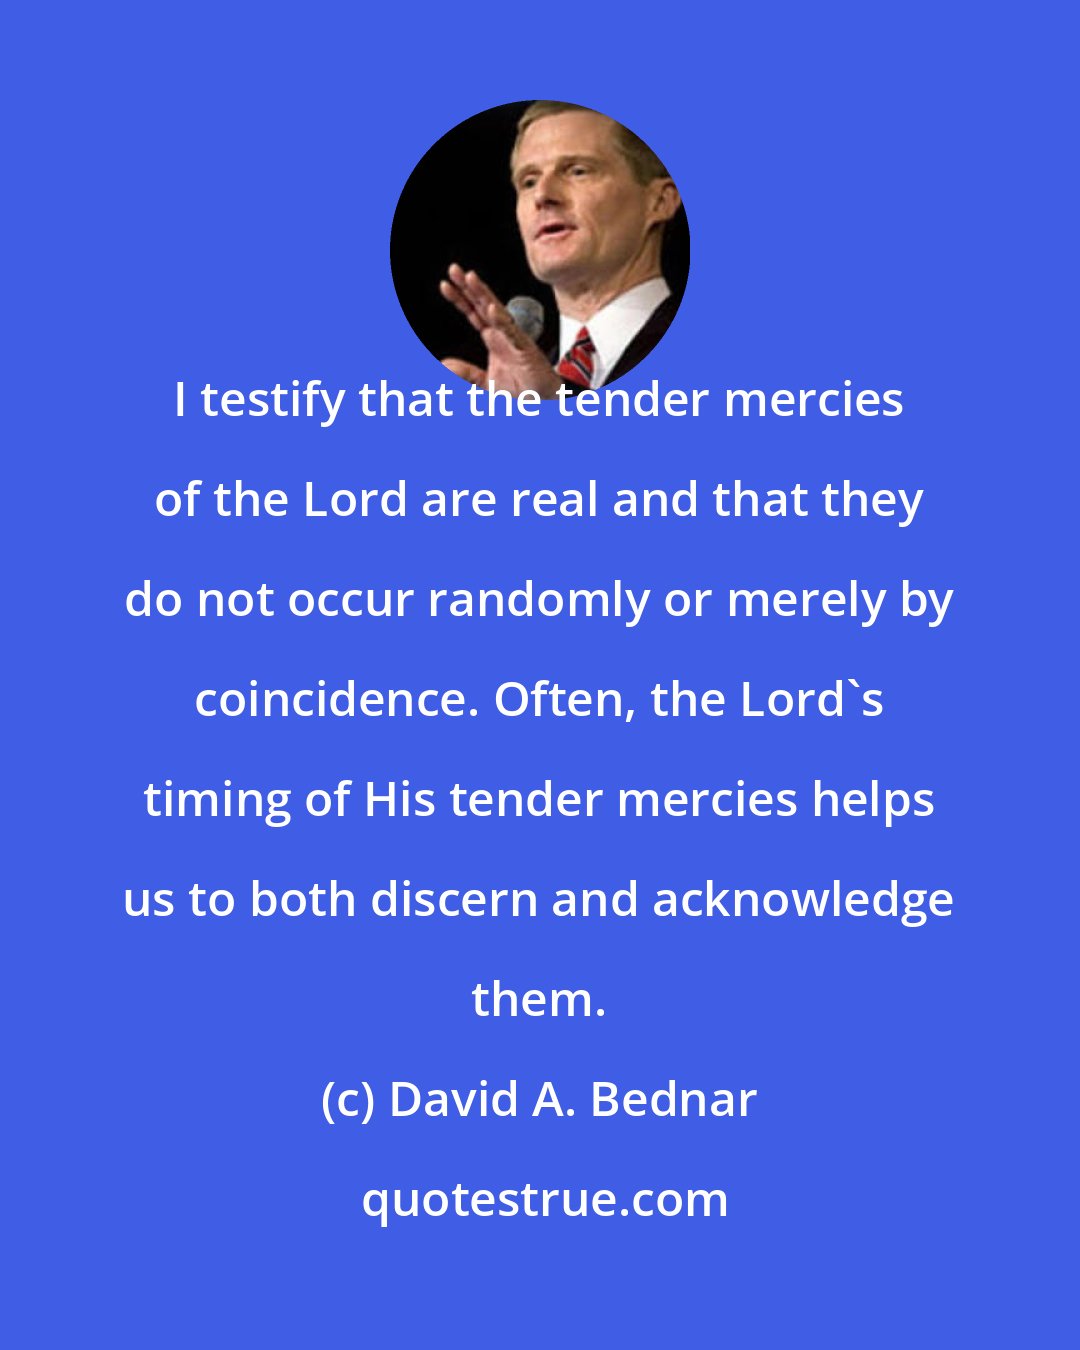 David A. Bednar: I testify that the tender mercies of the Lord are real and that they do not occur randomly or merely by coincidence. Often, the Lord's timing of His tender mercies helps us to both discern and acknowledge them.